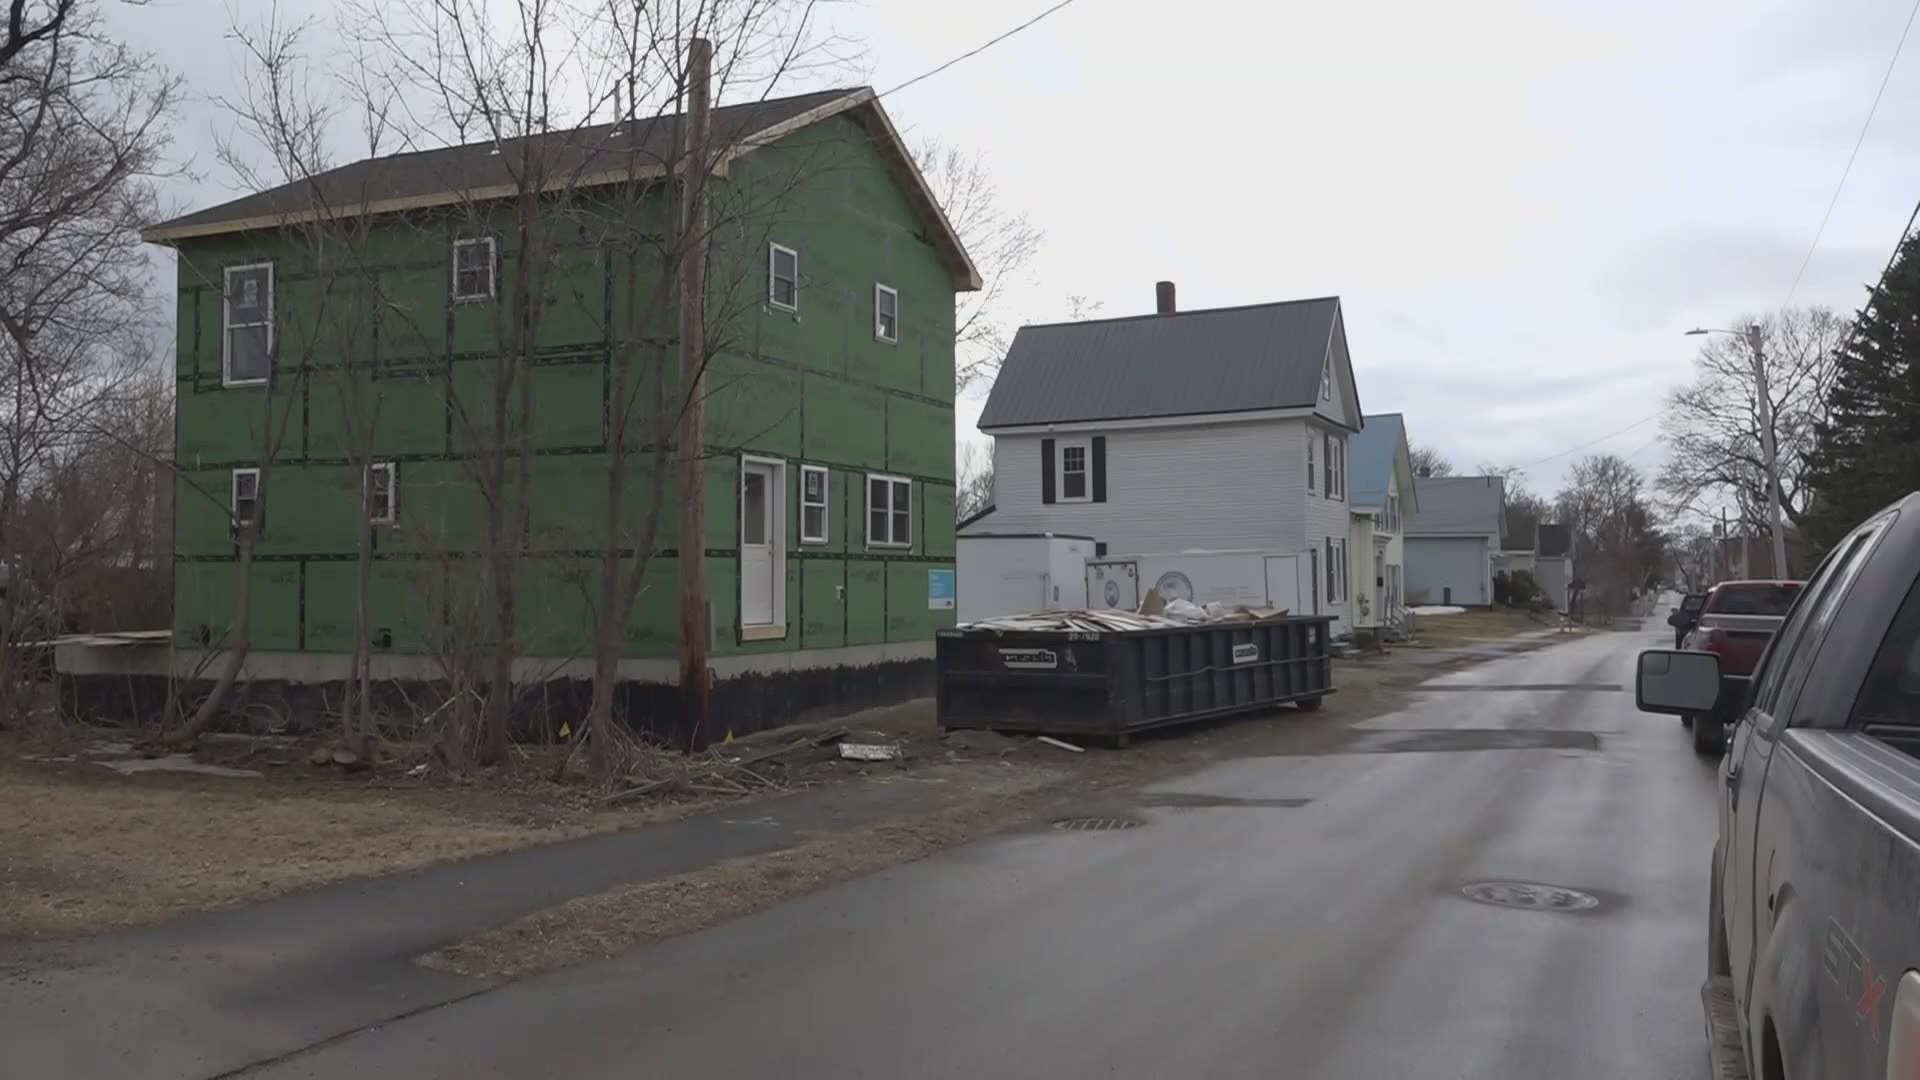 Habitat for Humanity of Greater Bangor received a $100,000 grant from the J.M. Huber Corporation to help build a home for Bangor mother Allison Parker.